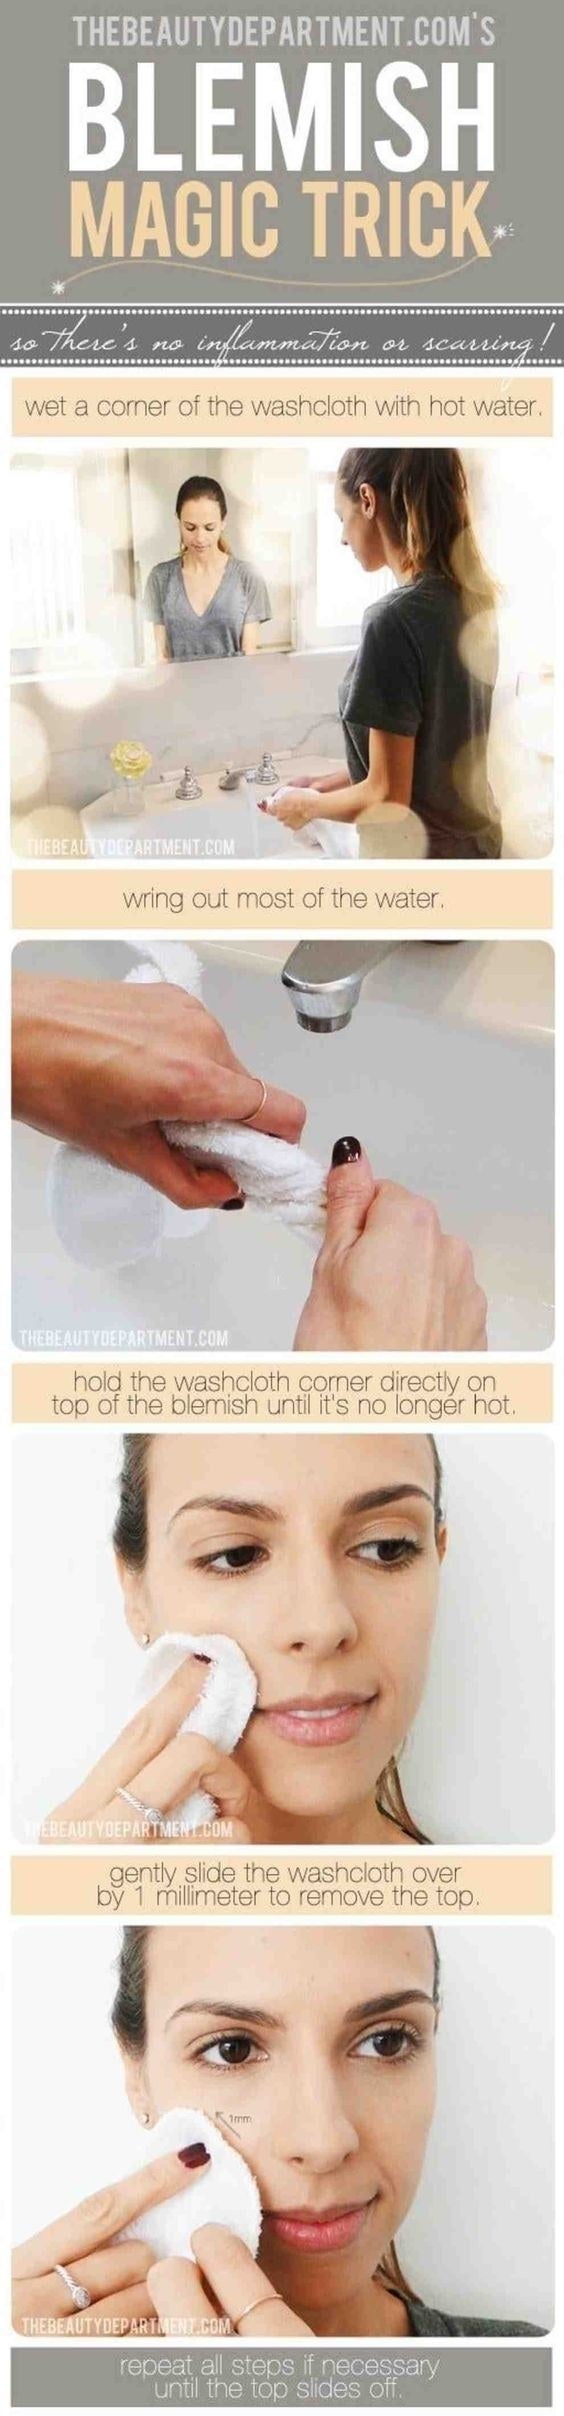 Graphic of woman using the washcloth as a blemish and anti-scarring trick